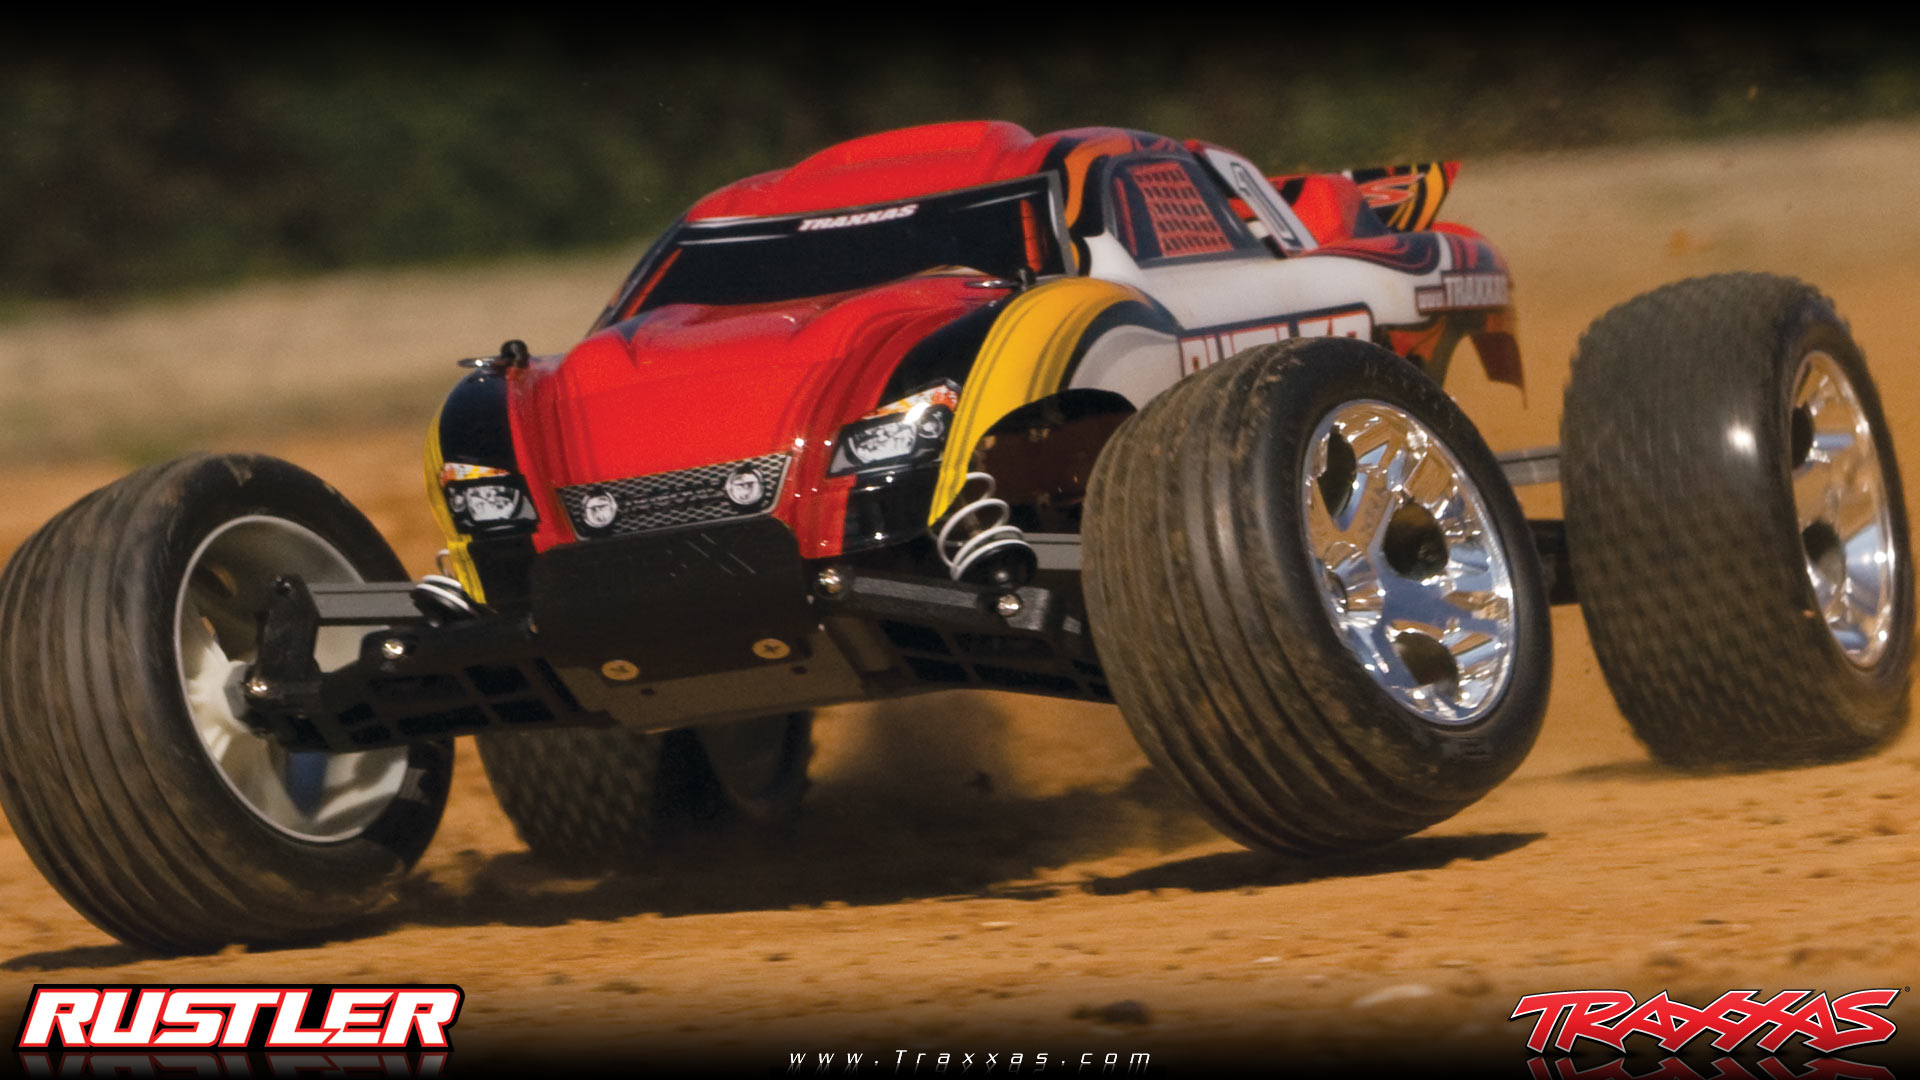 traxxas wallpaper,land vehicle,vehicle,car,truggy,off road racing